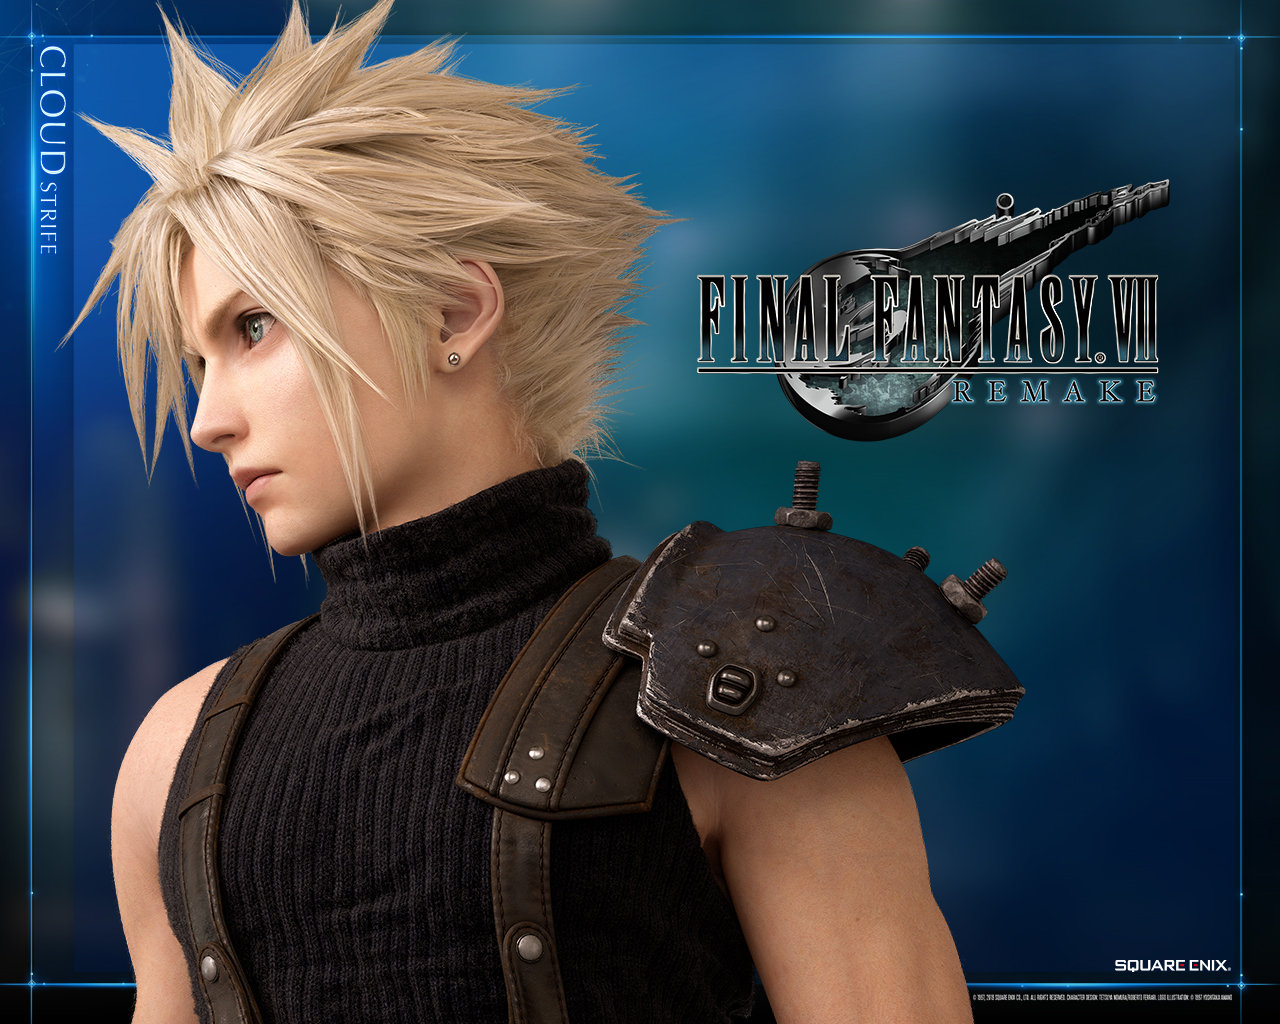 Final Fantasy 7 Remake Art Book Possibly Shows Off Part 2’s Weapons